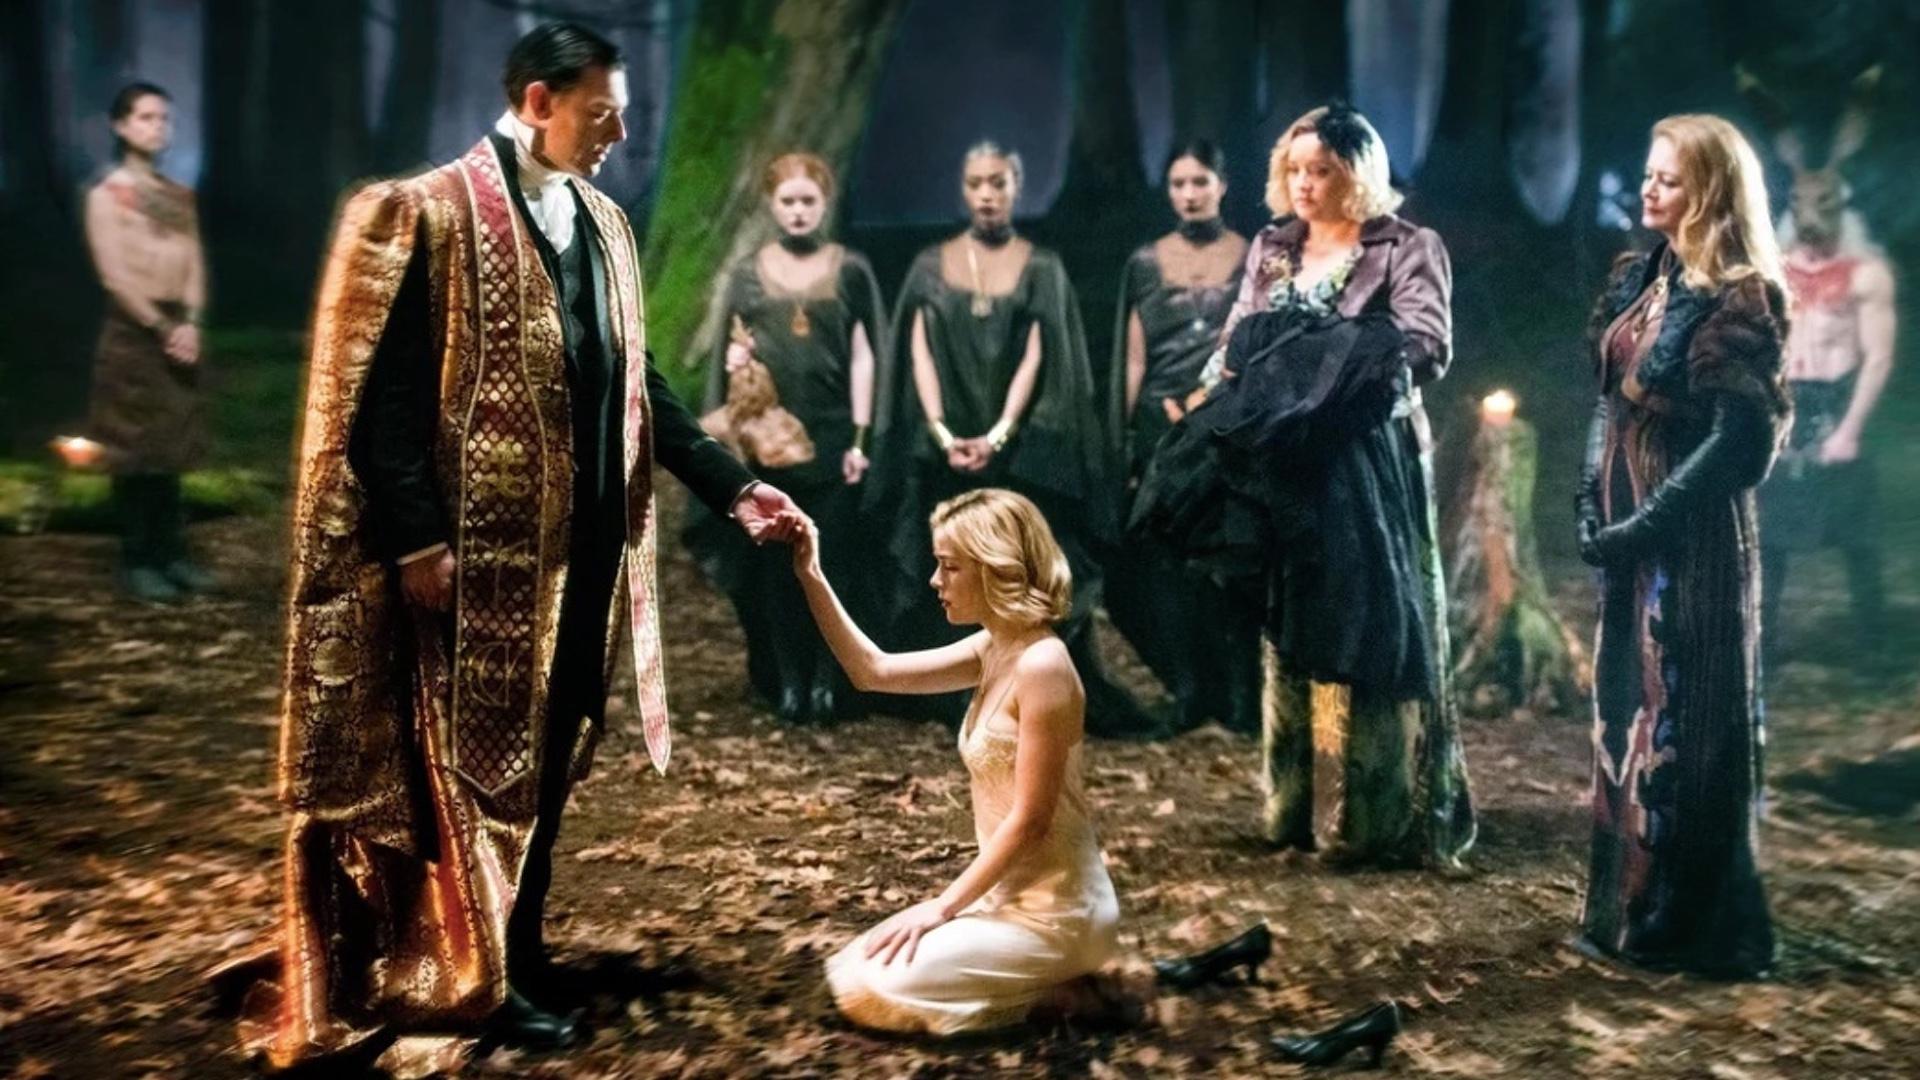 New Image Released For Netflix's THE CHILLING ADVENTURES OF SABRINA